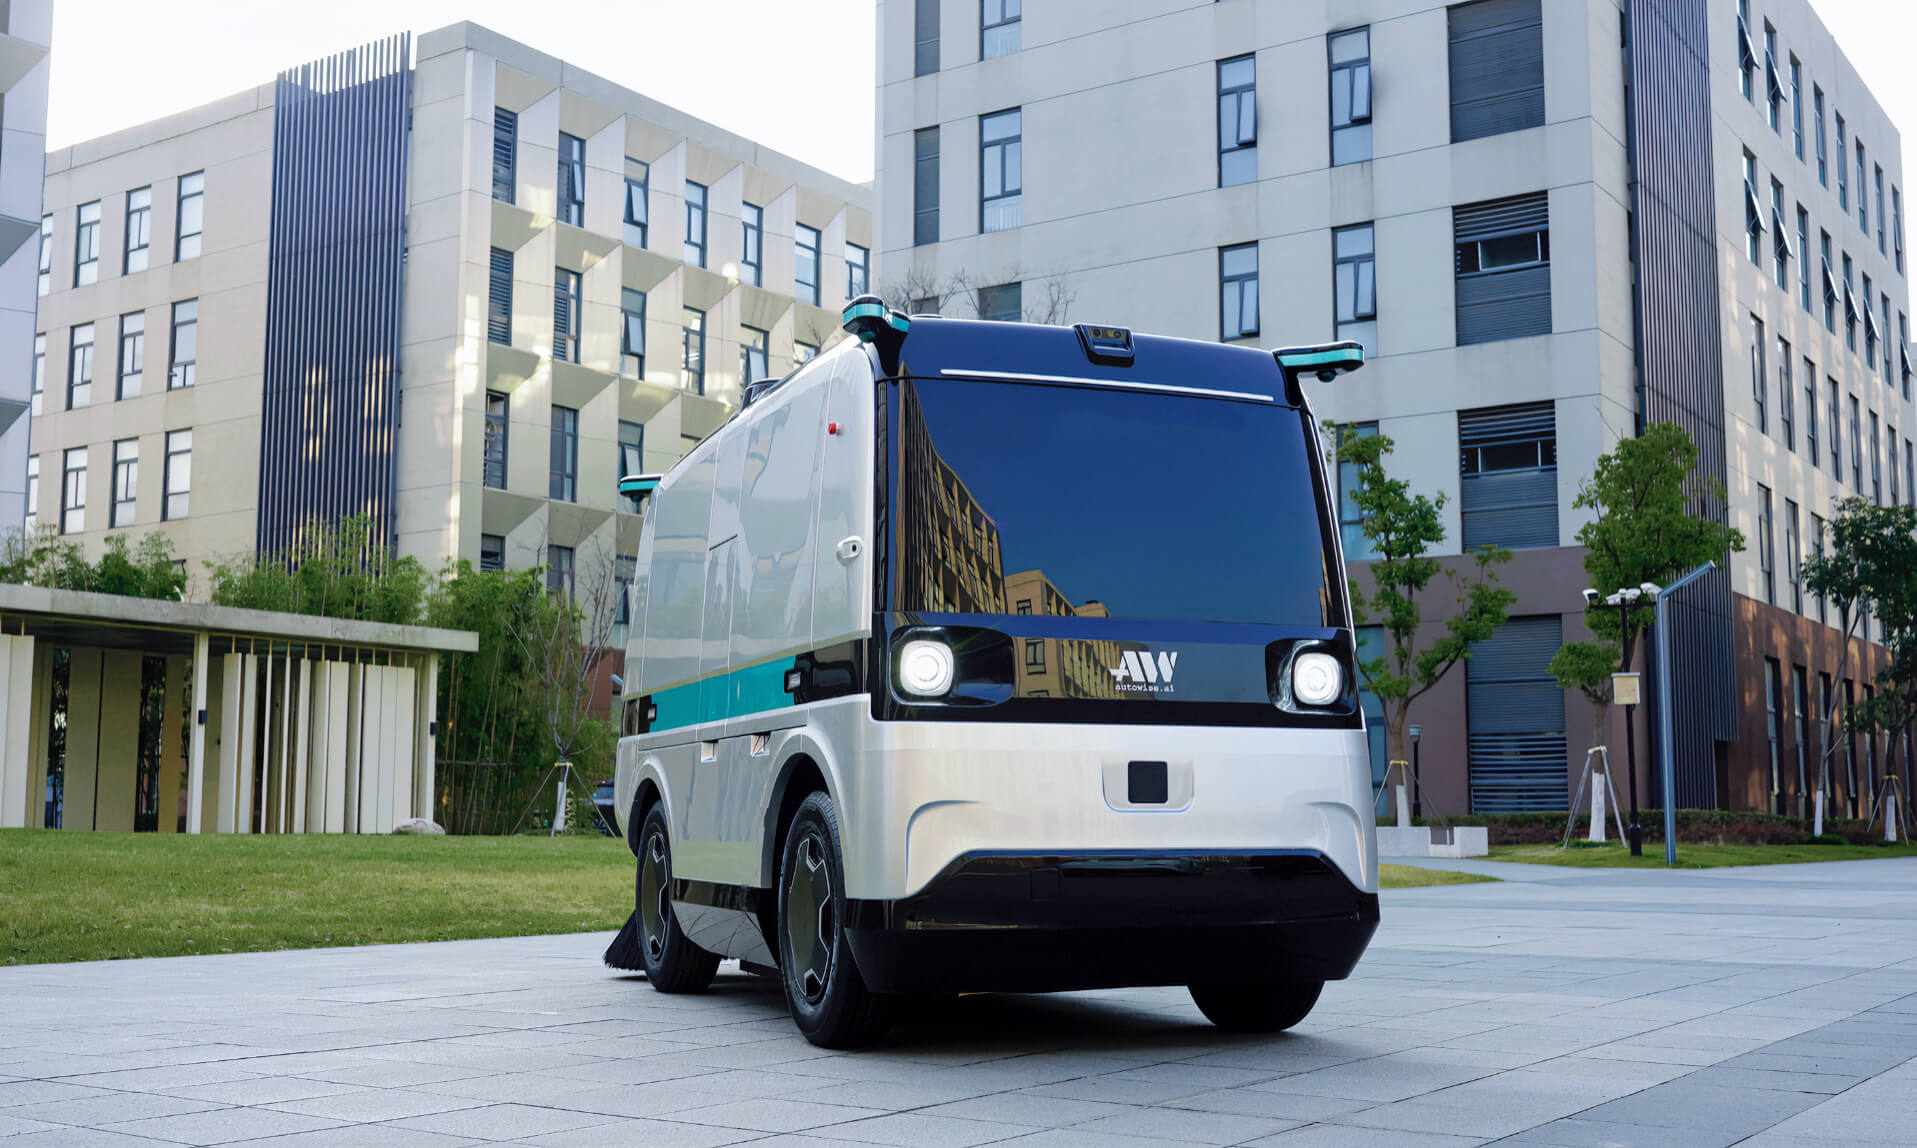 Autowise.ai launches multi-purpose autonomous sanitation vehicle capable of reducing operational costs by 70% – meet the Platforma-X!